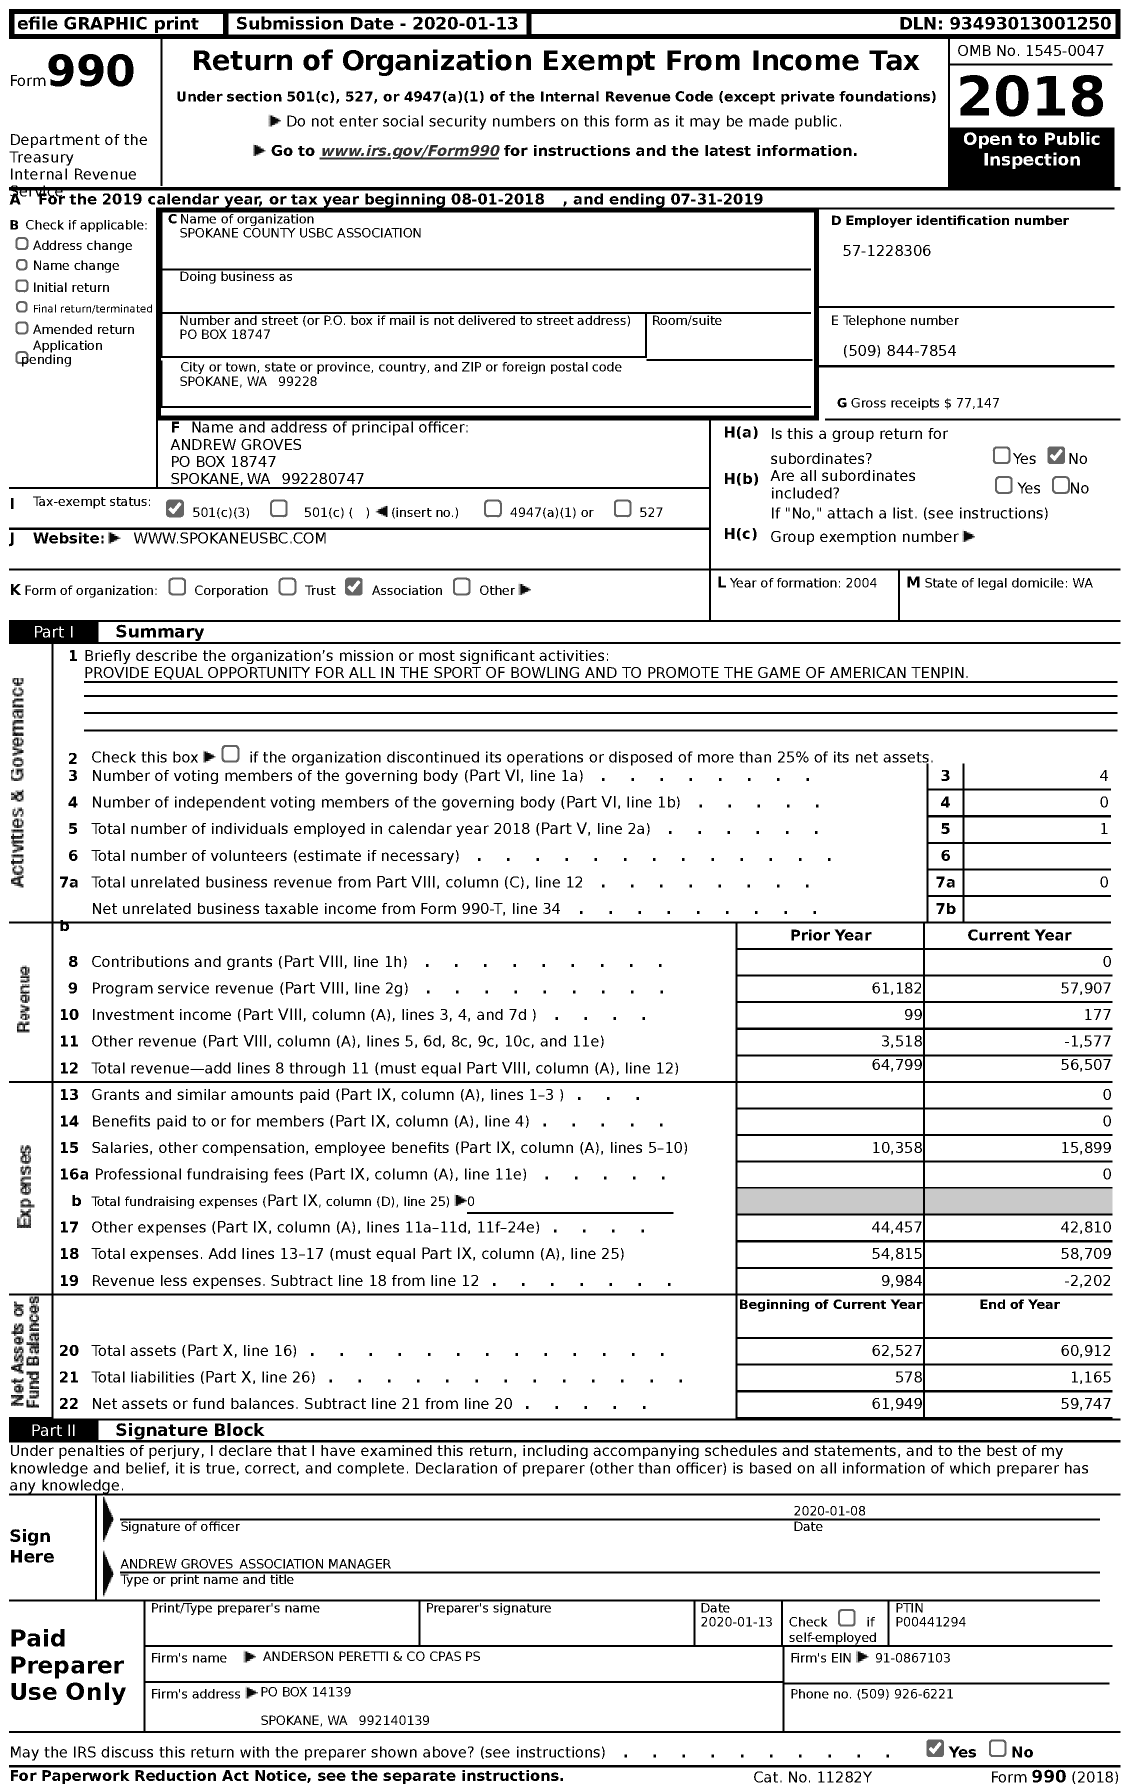 Image of first page of 2018 Form 990 for United States Bowling Congress - 80280 Spokane County Usbc